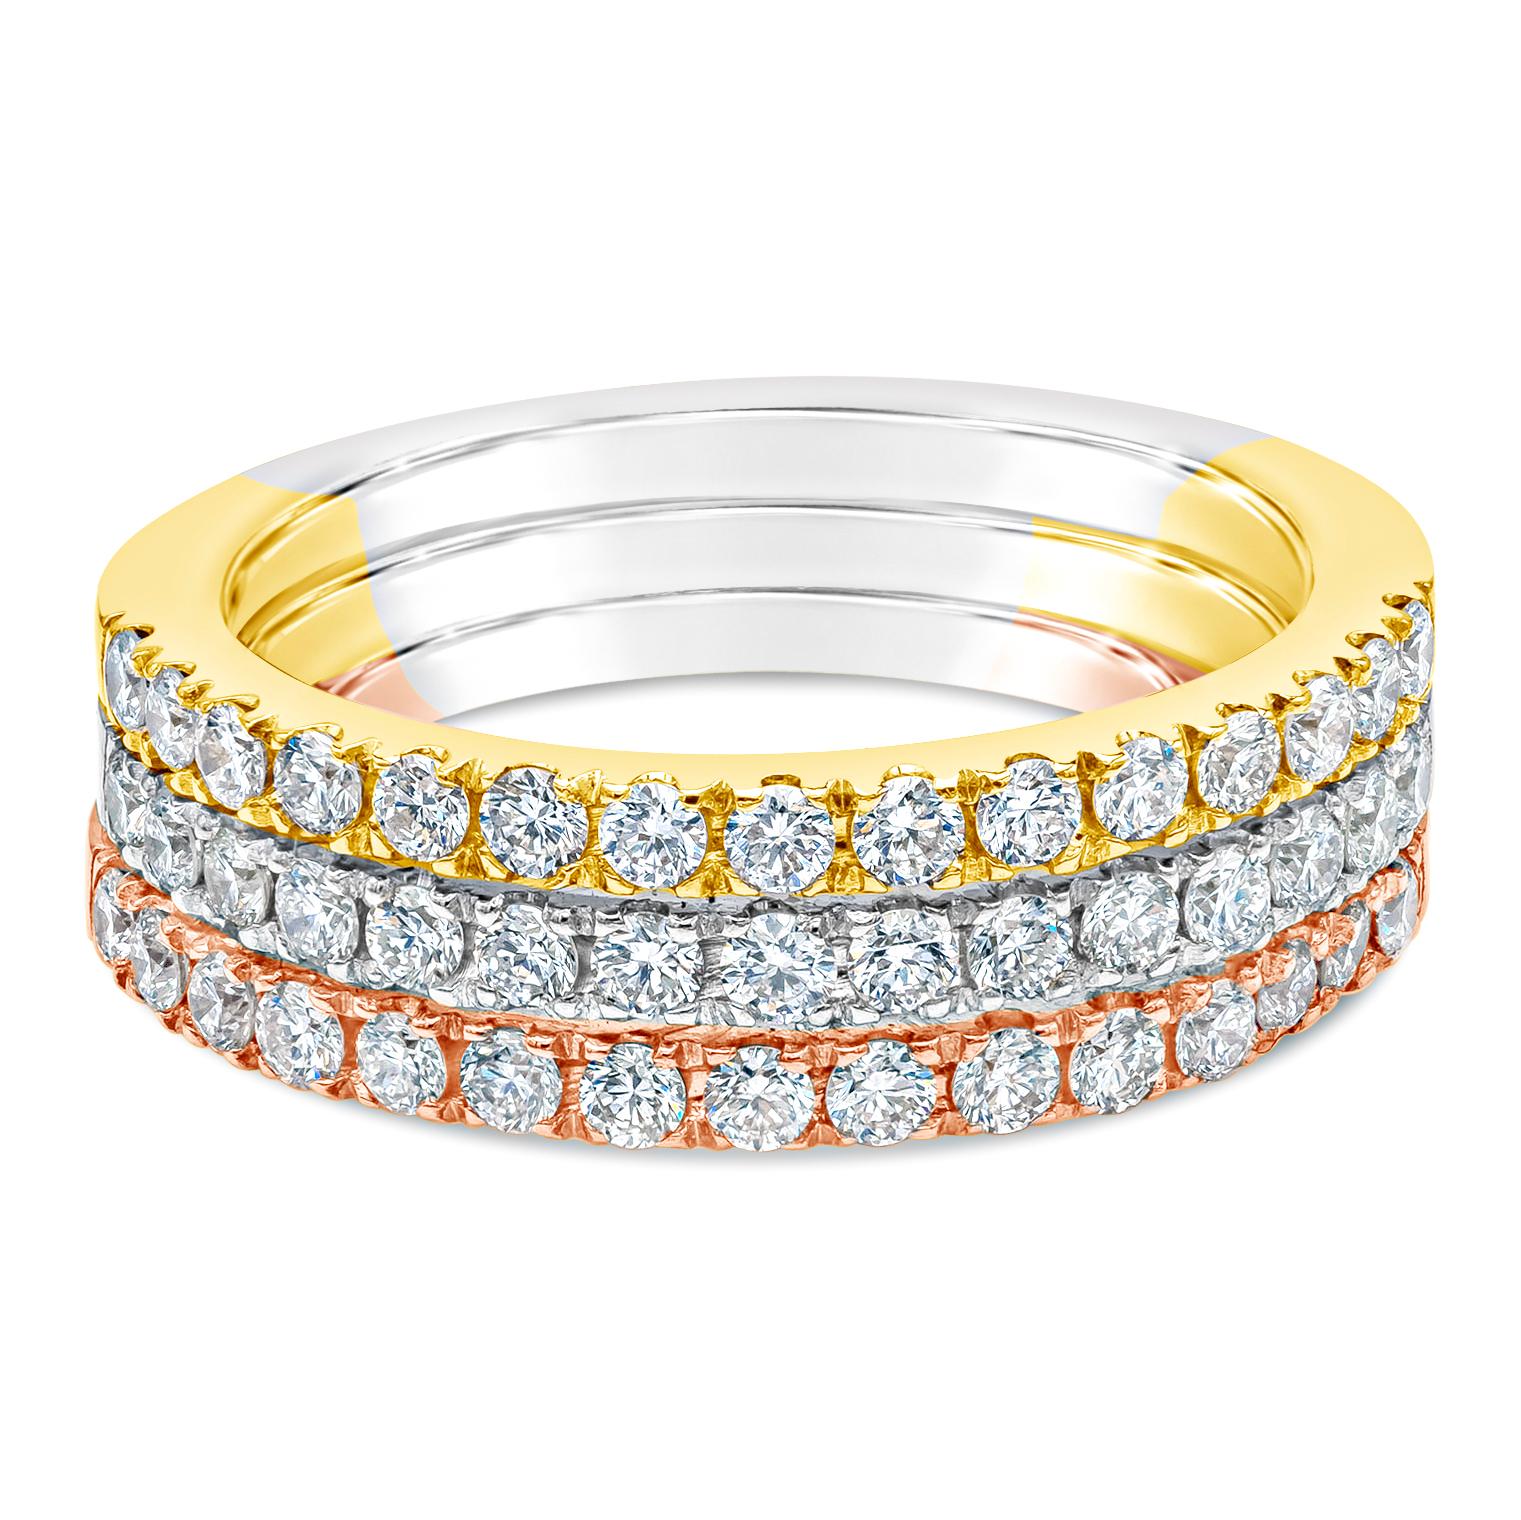 A fashionable wedding band, showcasing three stacked rings set half-way with round brilliant cut diamonds weighing 1.01 carats total with F color and VS clarity. Set on 14K tri-color yellow, white, and rose gold. Size 7 US.

Roman Malakov is a